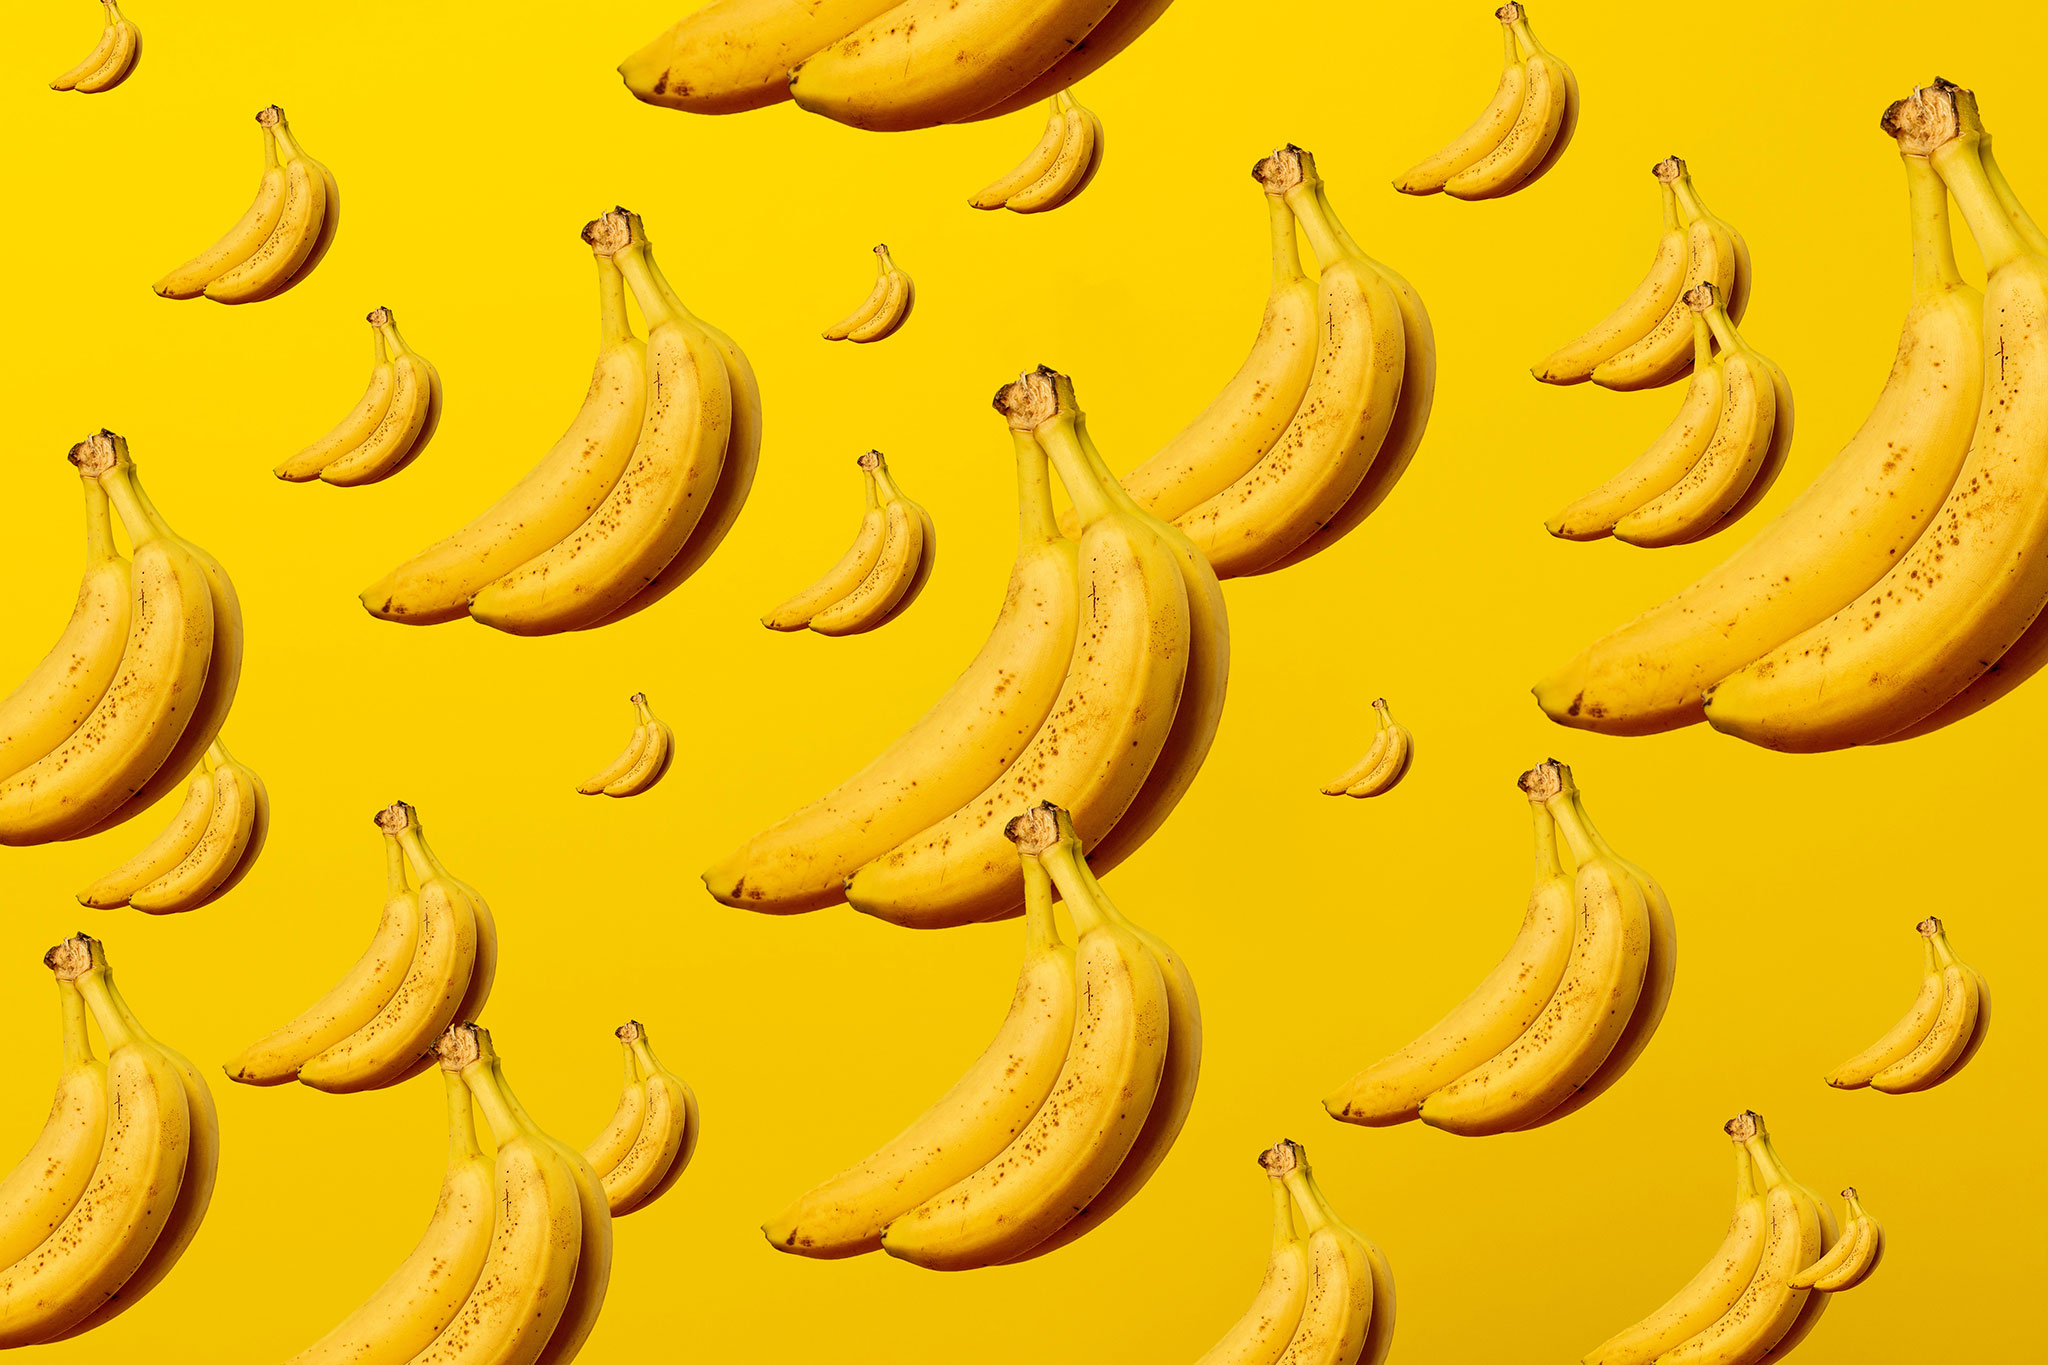 Yellow bananas on a yellow background